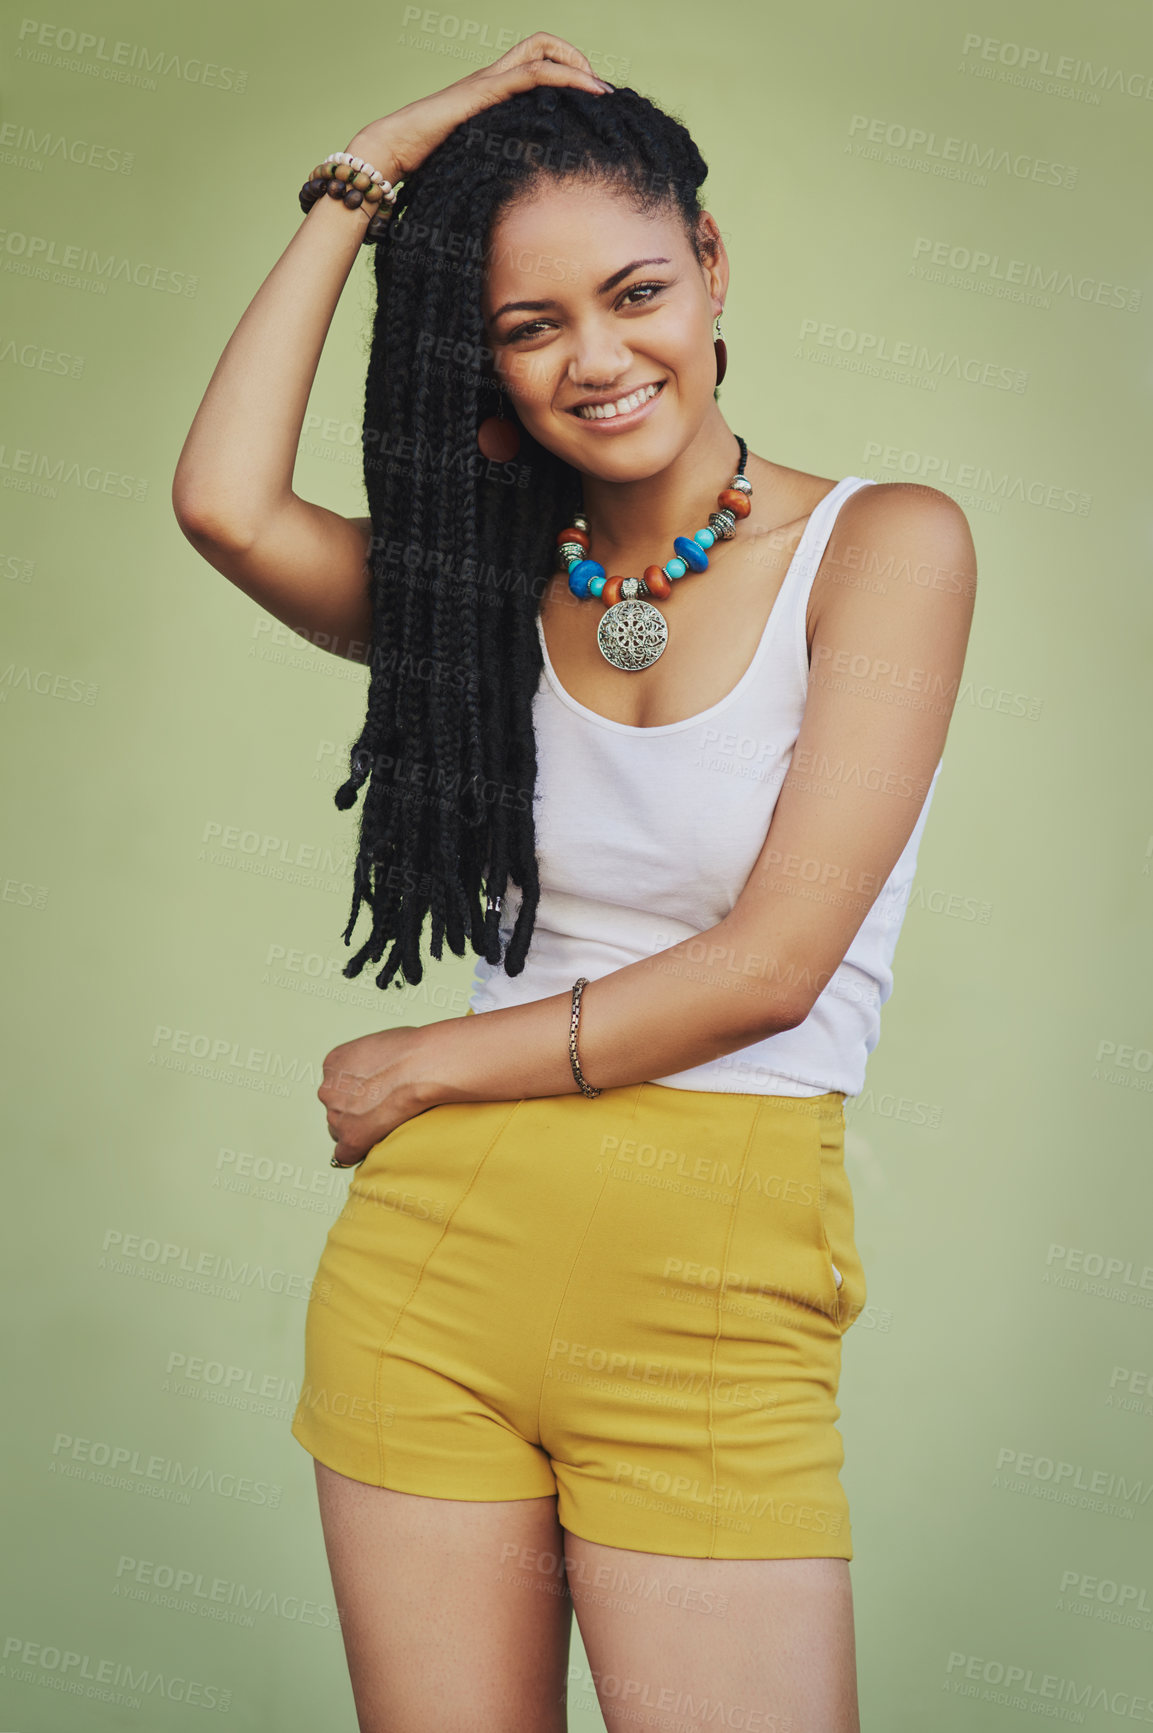 Buy stock photo Portrait of an attractive young woman posing against a green background